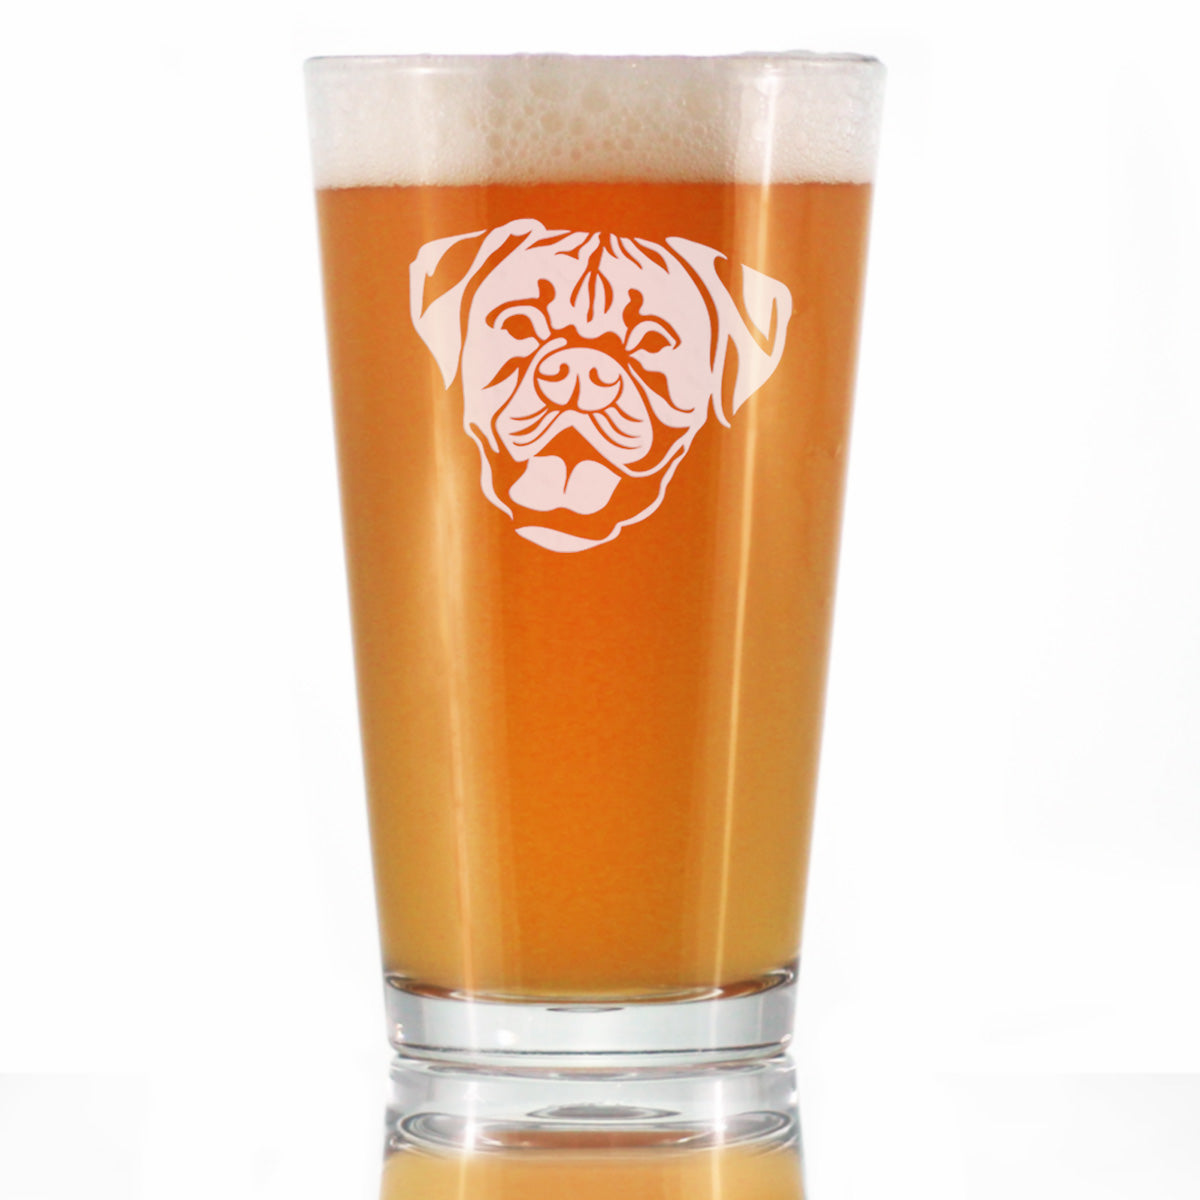 Boxer with Natural Ears - Pint Glass for Beer - Fun Unique Boxer Themed Dog Gifts and Party Decor for Women and Men - 16 oz